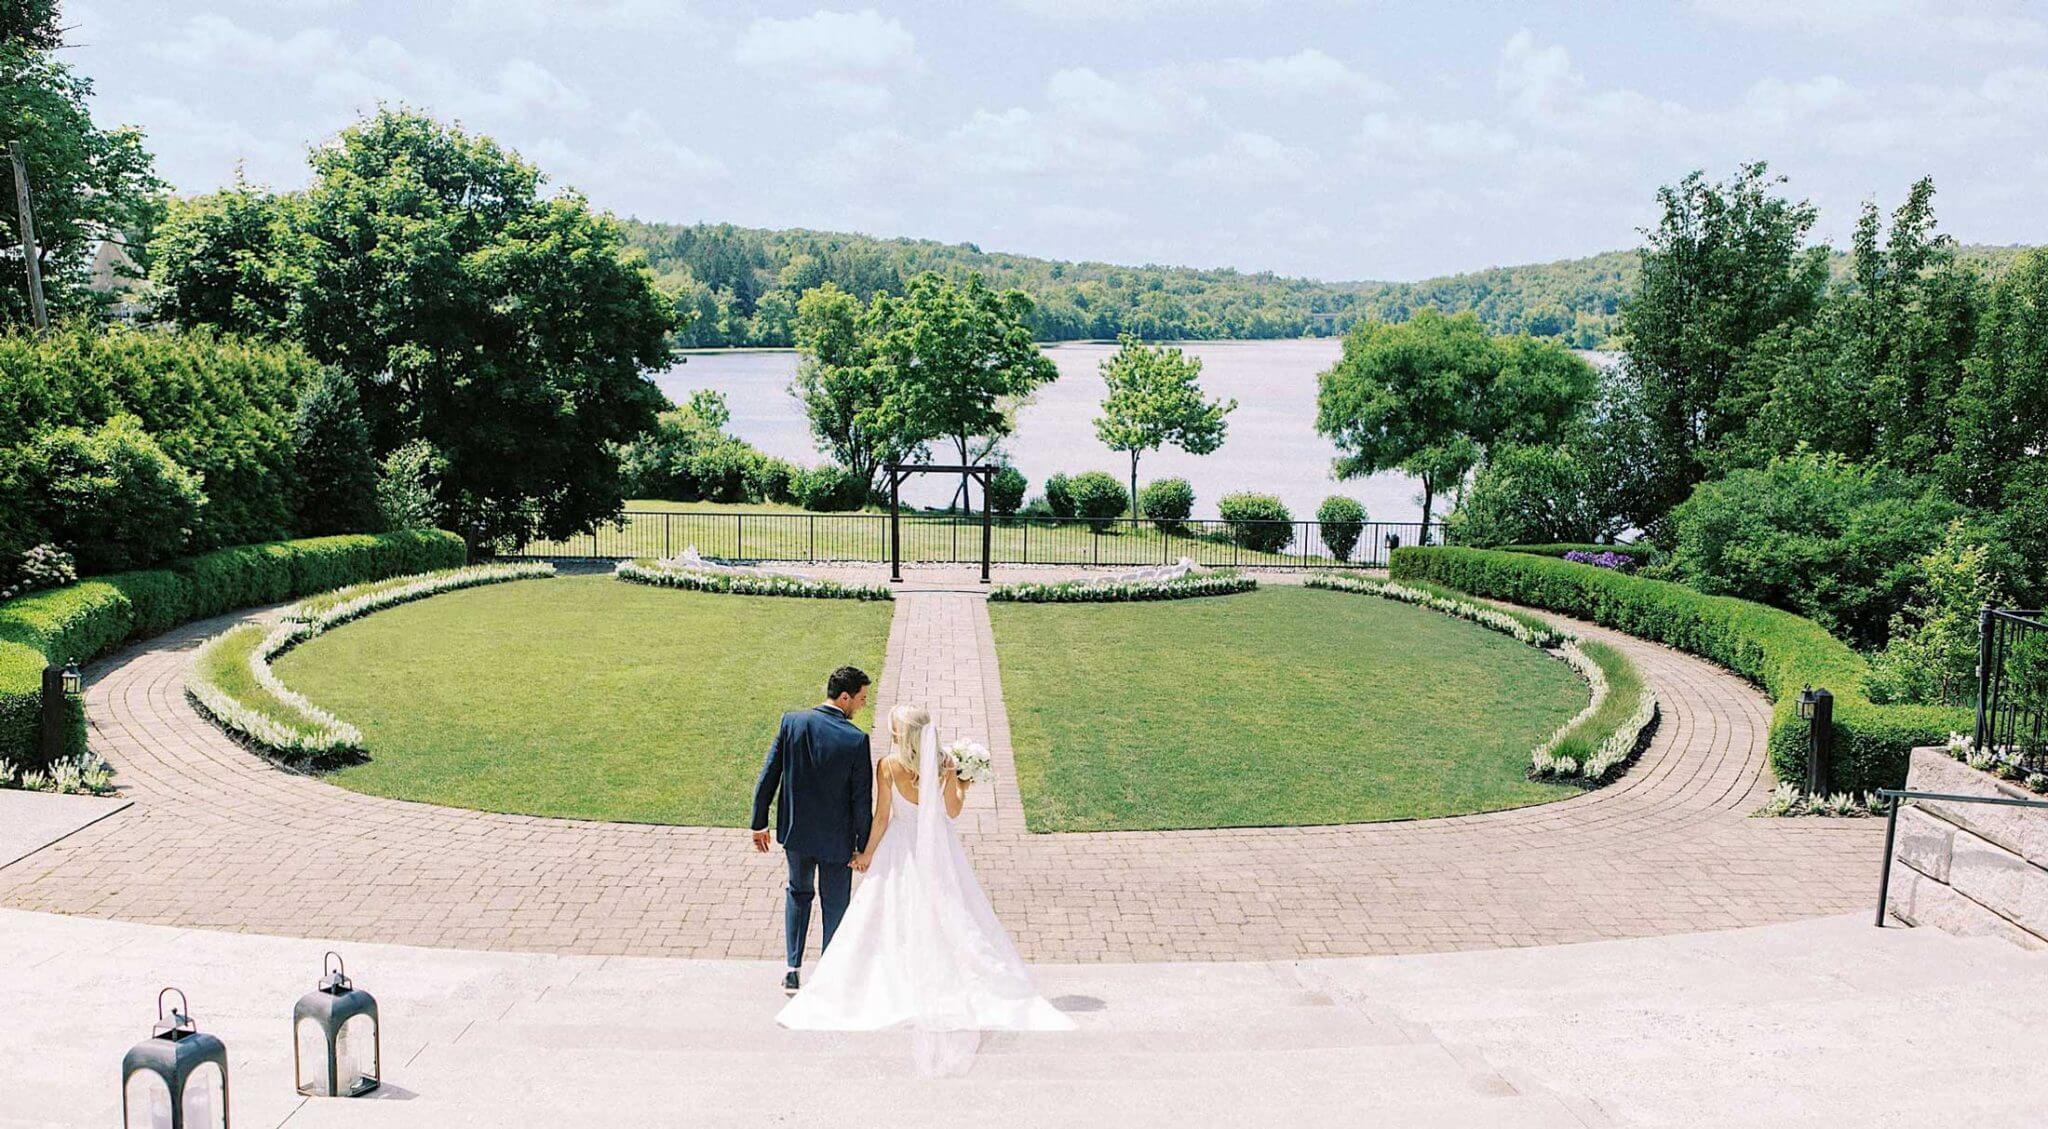 A bride and groom walking down a path in front of a lake.